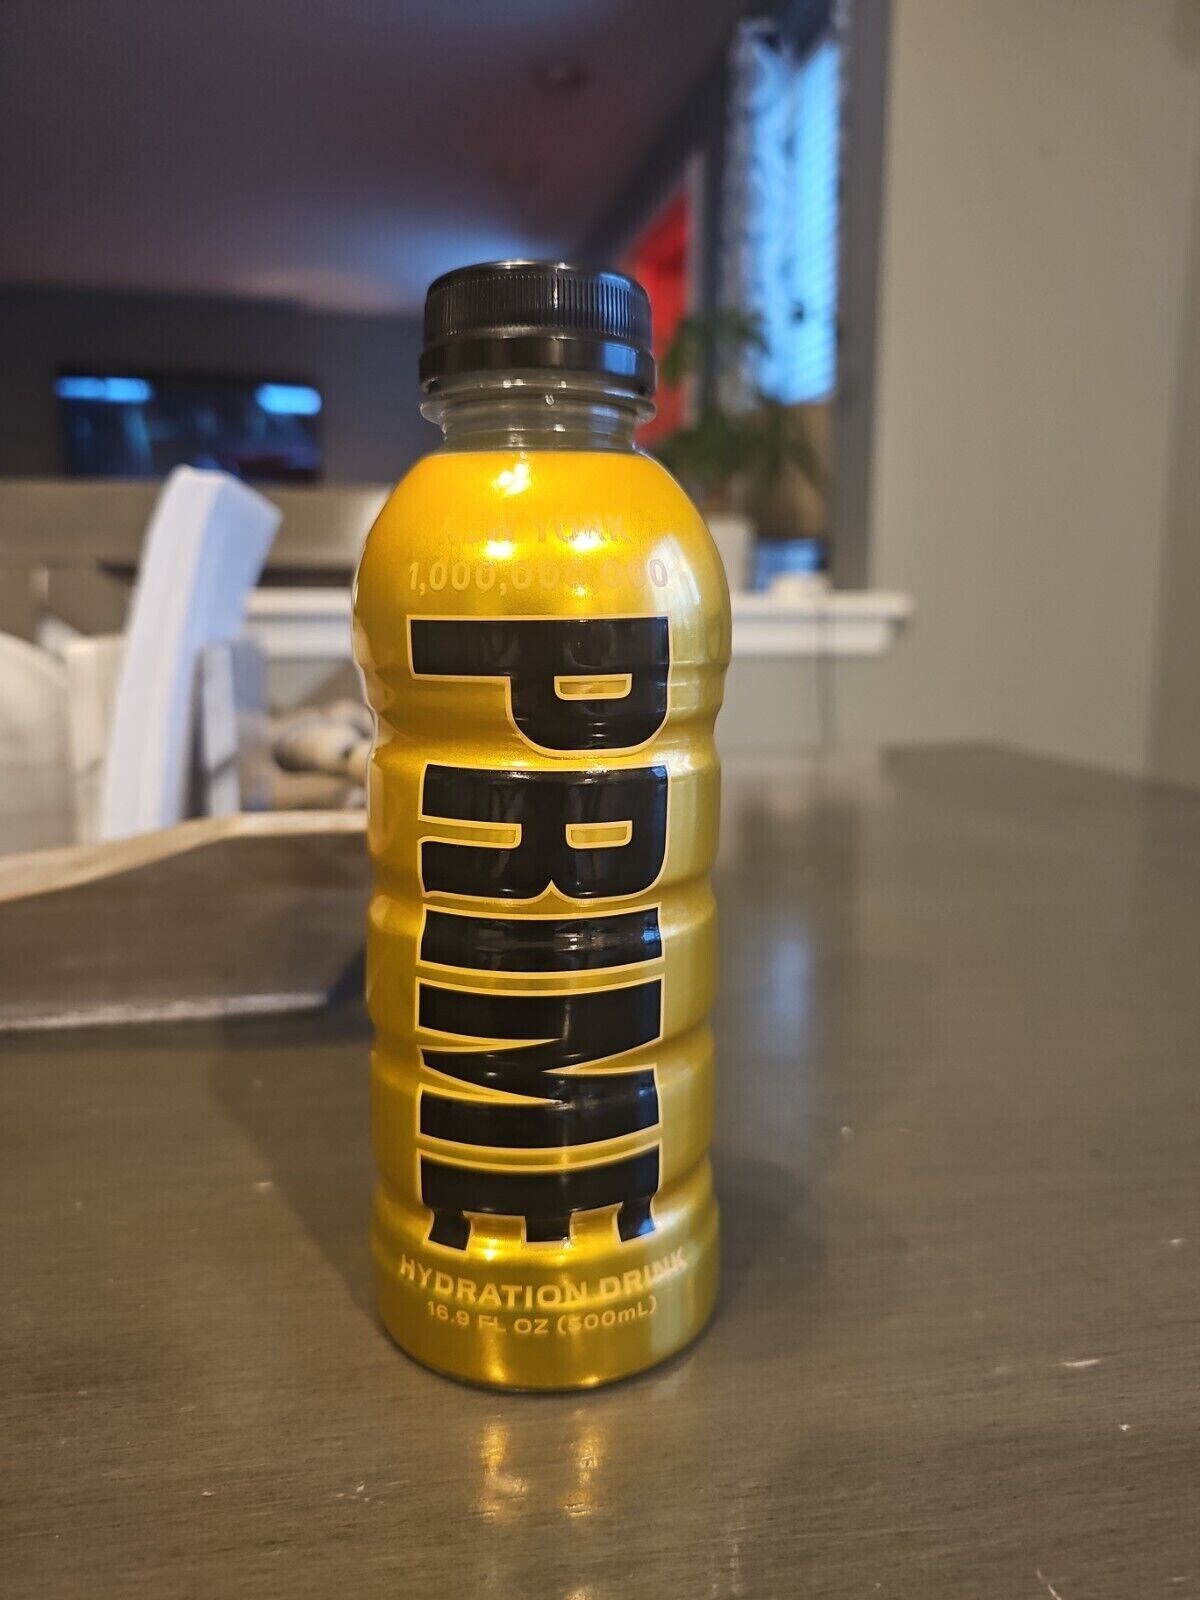 Limited Edition 100,000,000 Gold Prime Hydration Drink NY Edition